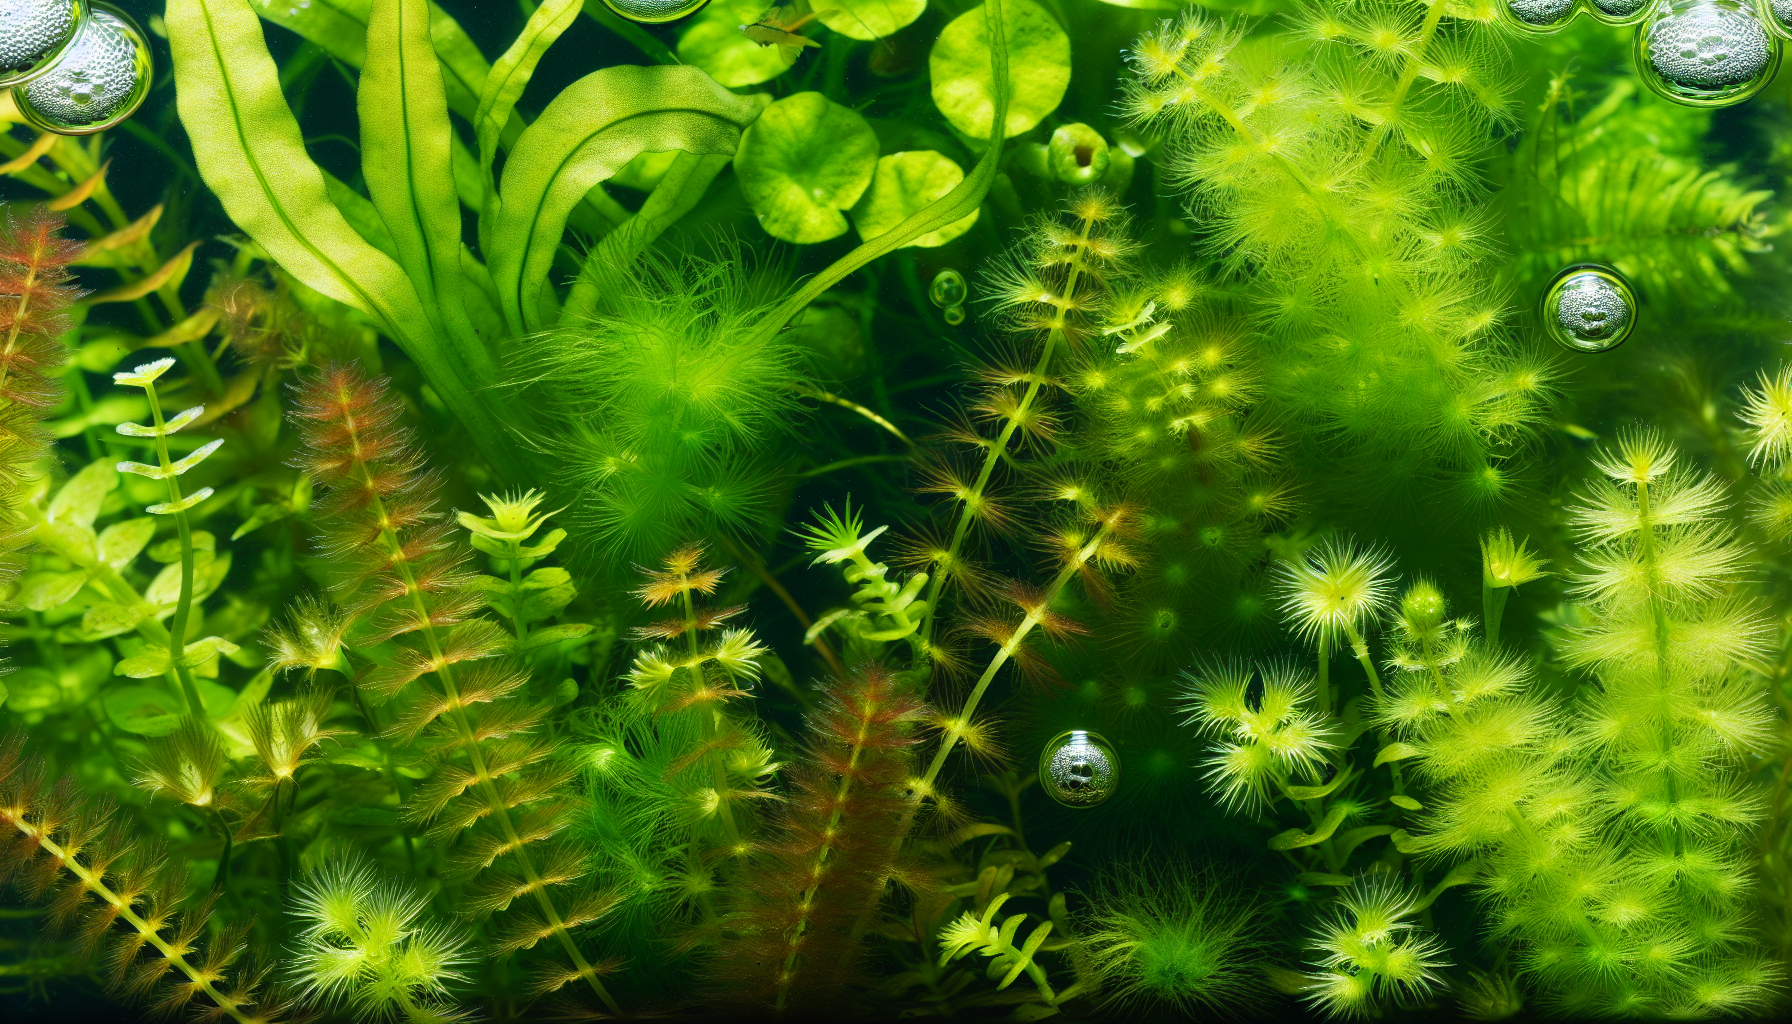 A collection of popular freshwater aquatic plants including ferns, mosses, and stems